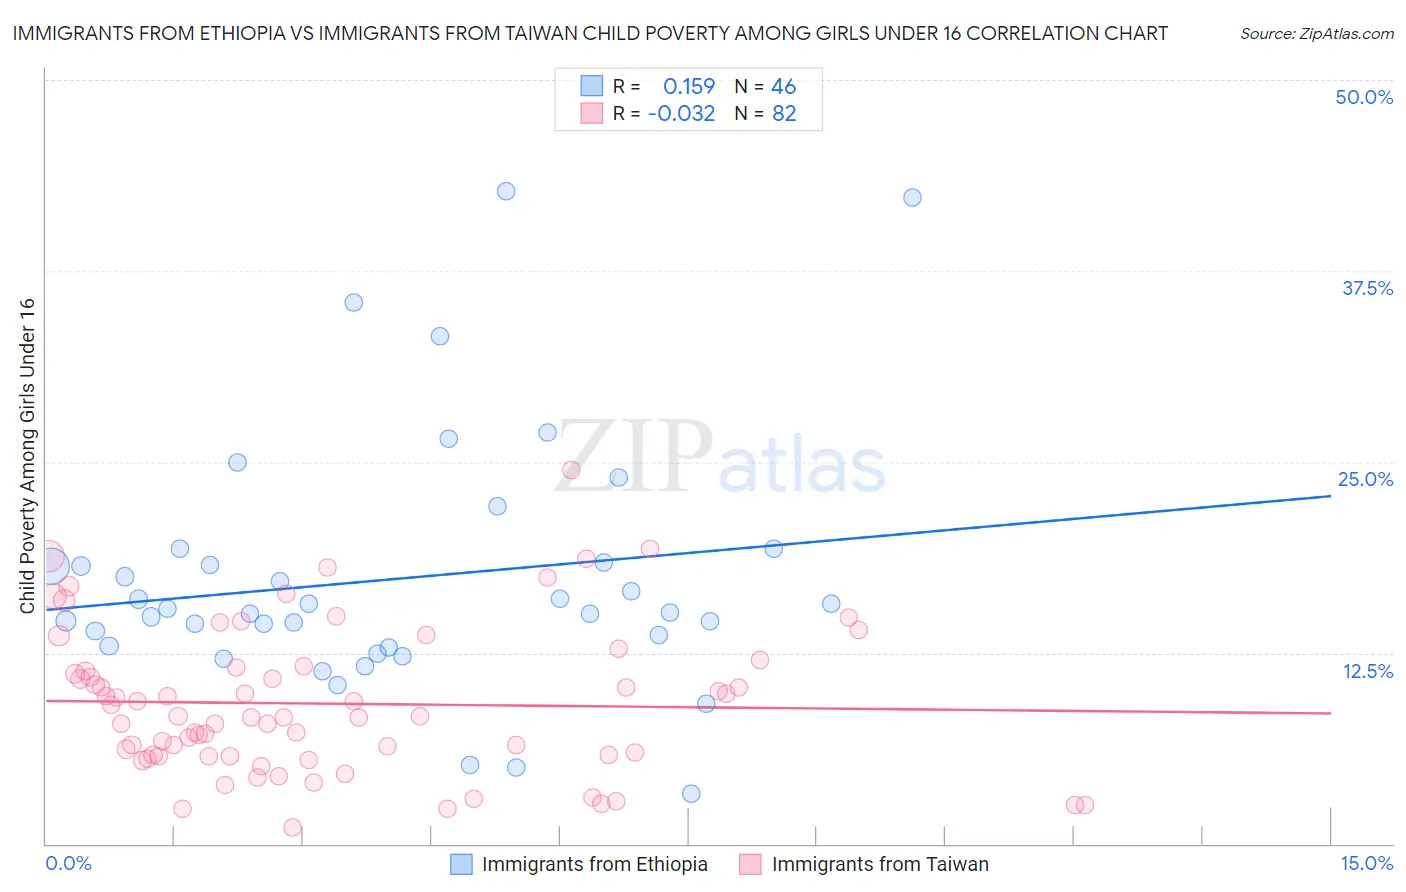 Immigrants from Ethiopia vs Immigrants from Taiwan Child Poverty Among Girls Under 16